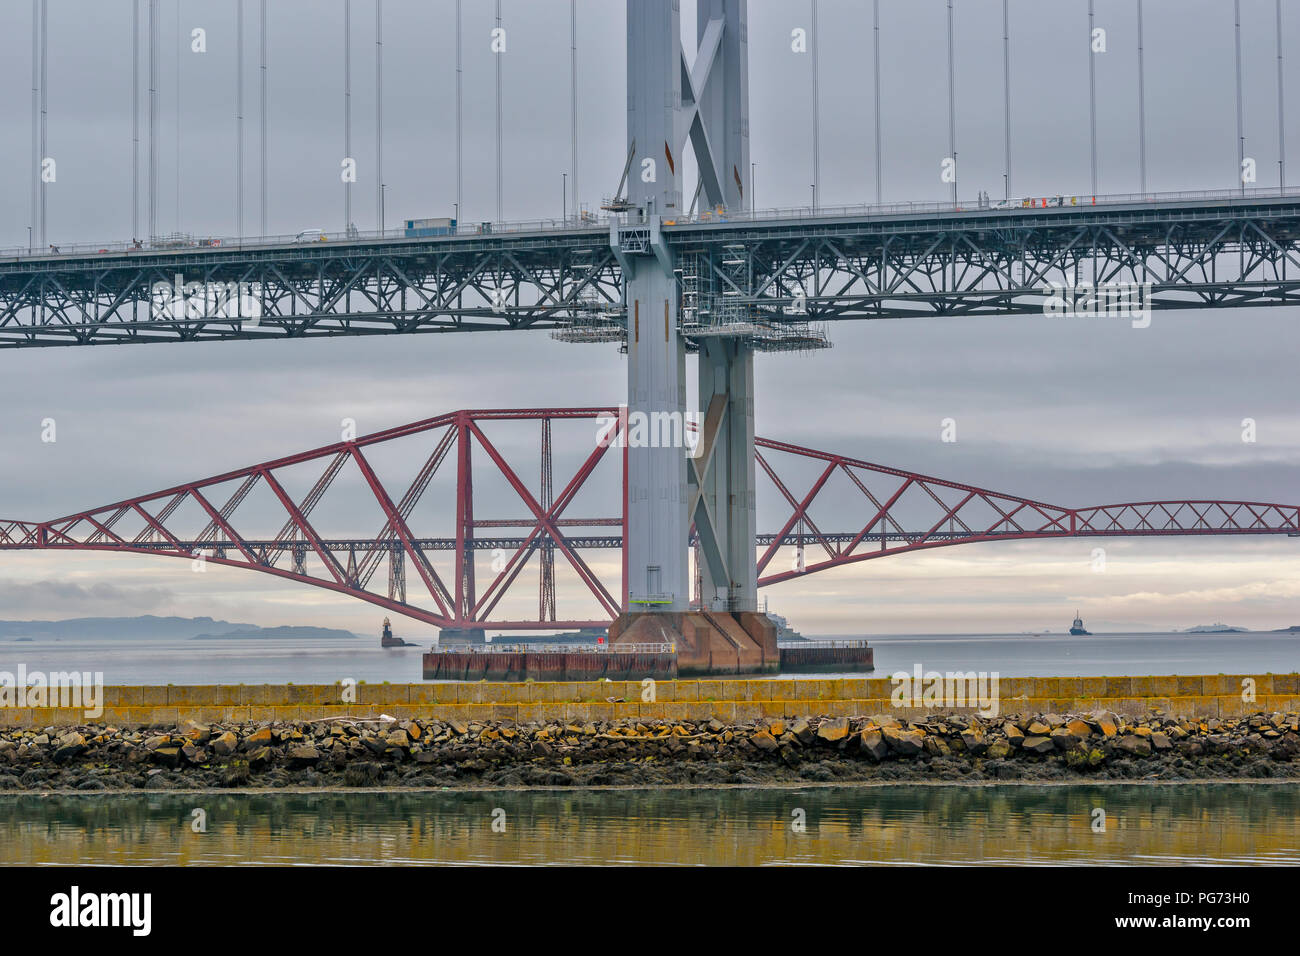 FORTH RAILWAY BRIDGE OVER THE FIRTH OF FORTH SCOTLAND AND THE OLD ROAD BRIDGE UNDERGOING REPAIR Stock Photo